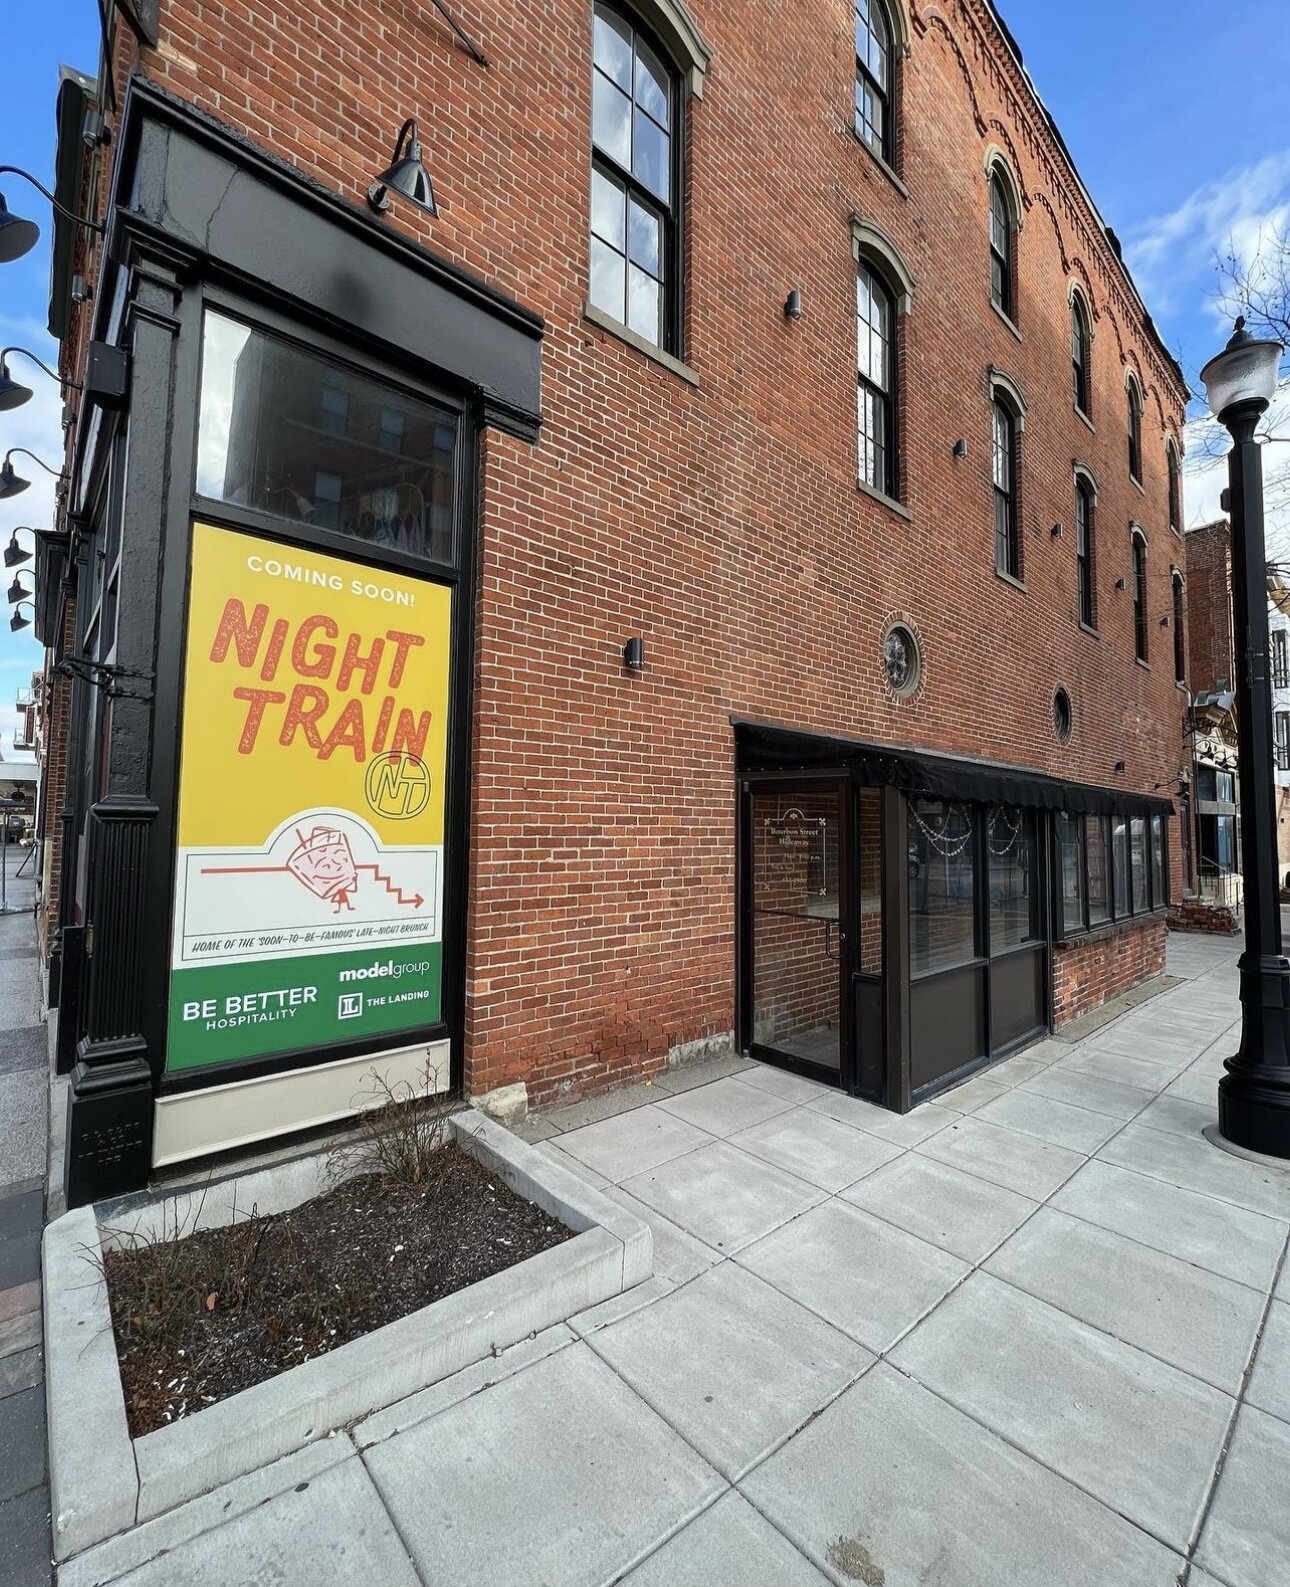 The future home of Night Train, a “playful, late-night basement cocktail bar.”